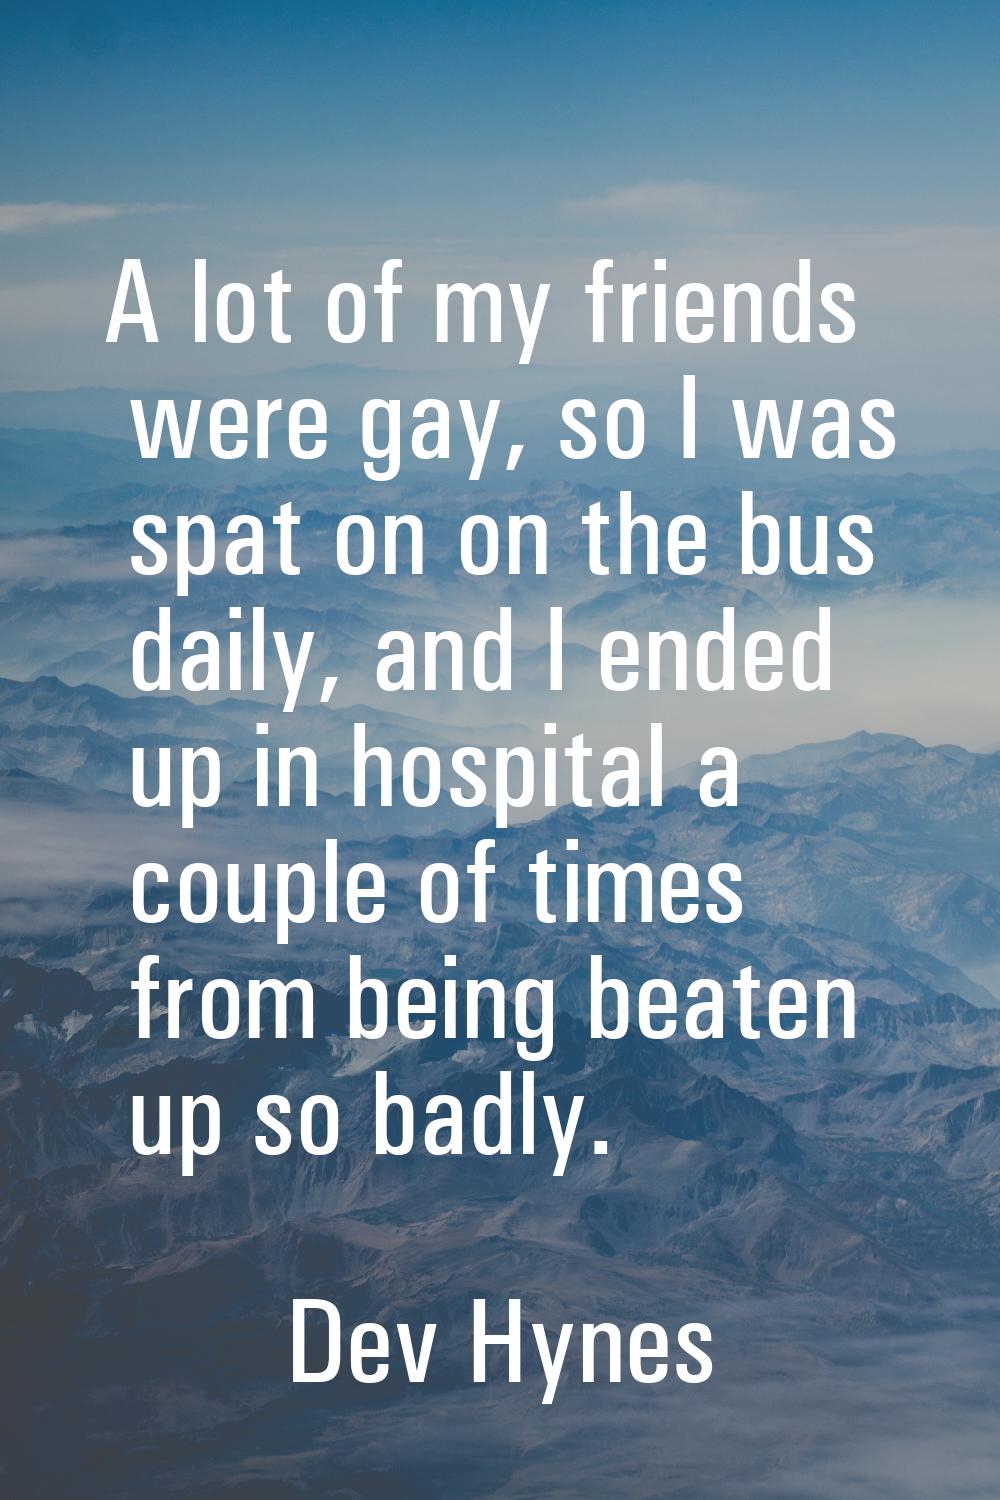 A lot of my friends were gay, so I was spat on on the bus daily, and I ended up in hospital a coupl